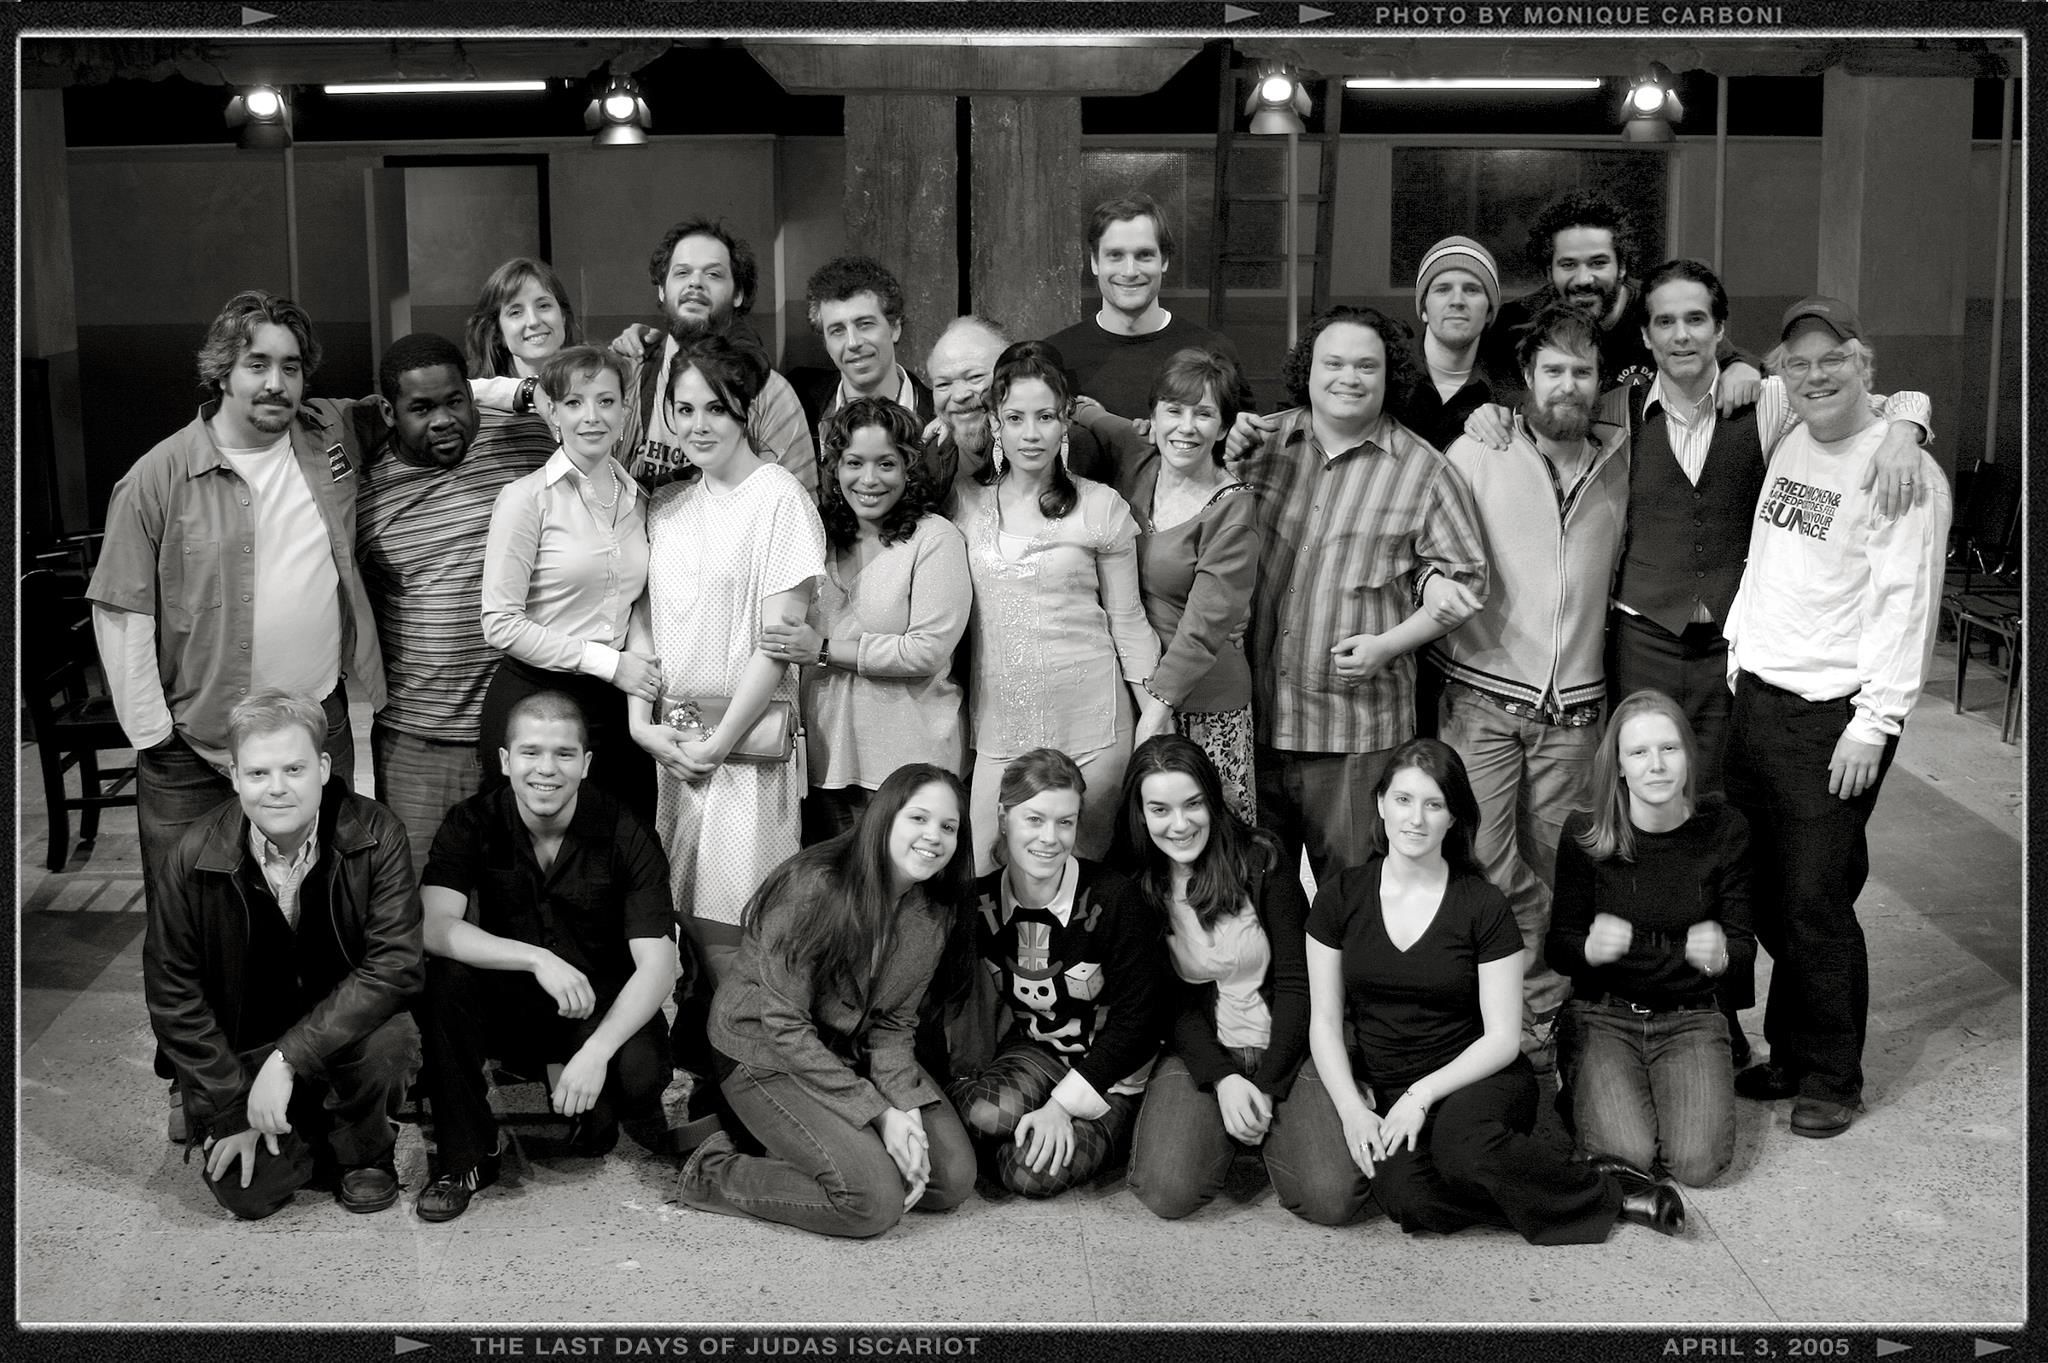 Labyrinth Theater Company- Cast of Last Days of Judas Iscariot. Public Theater, 2004